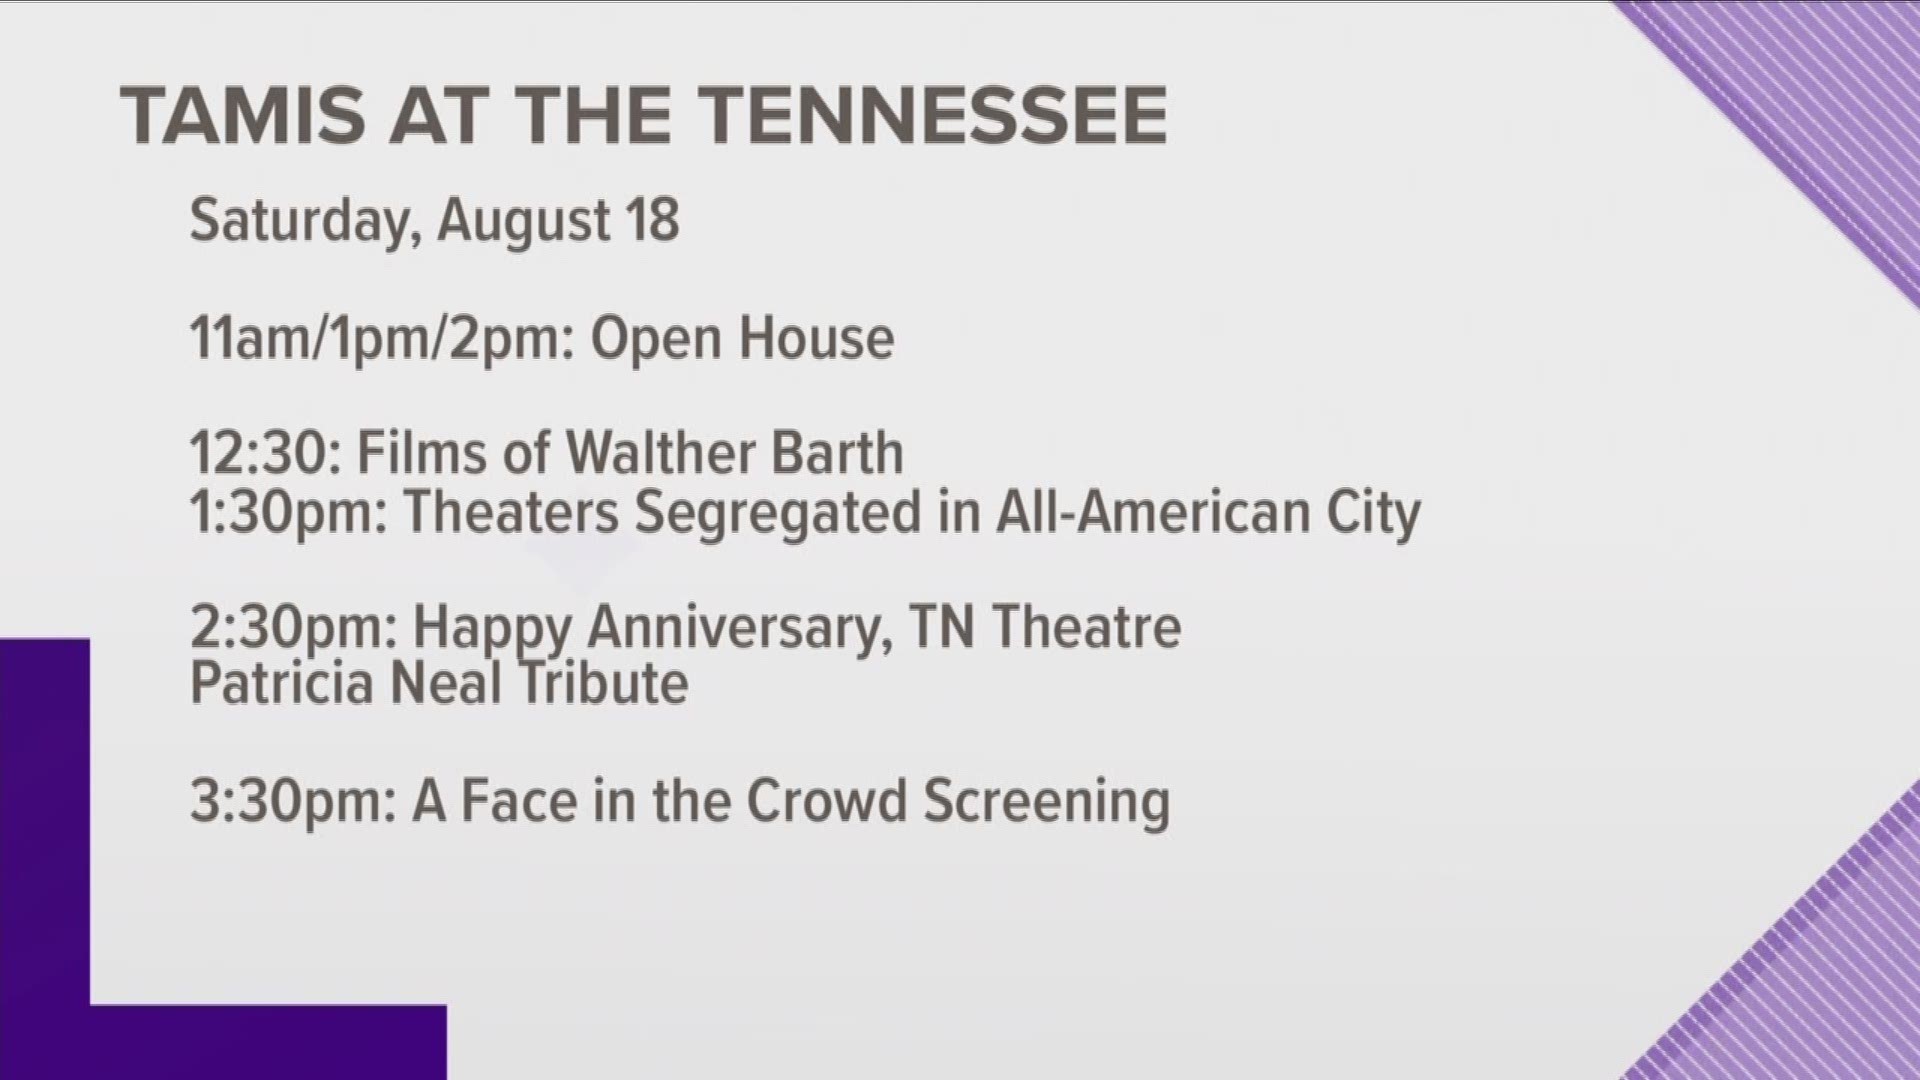 TAMIS at the Tennessee to feature Patricia Neal, a young Andy Griffith, Knoxville's desegregation, and a tribute to John Ward on Saturday, August 18. For more information visit knoxlib.org
Aug. 3, 2018-4pm